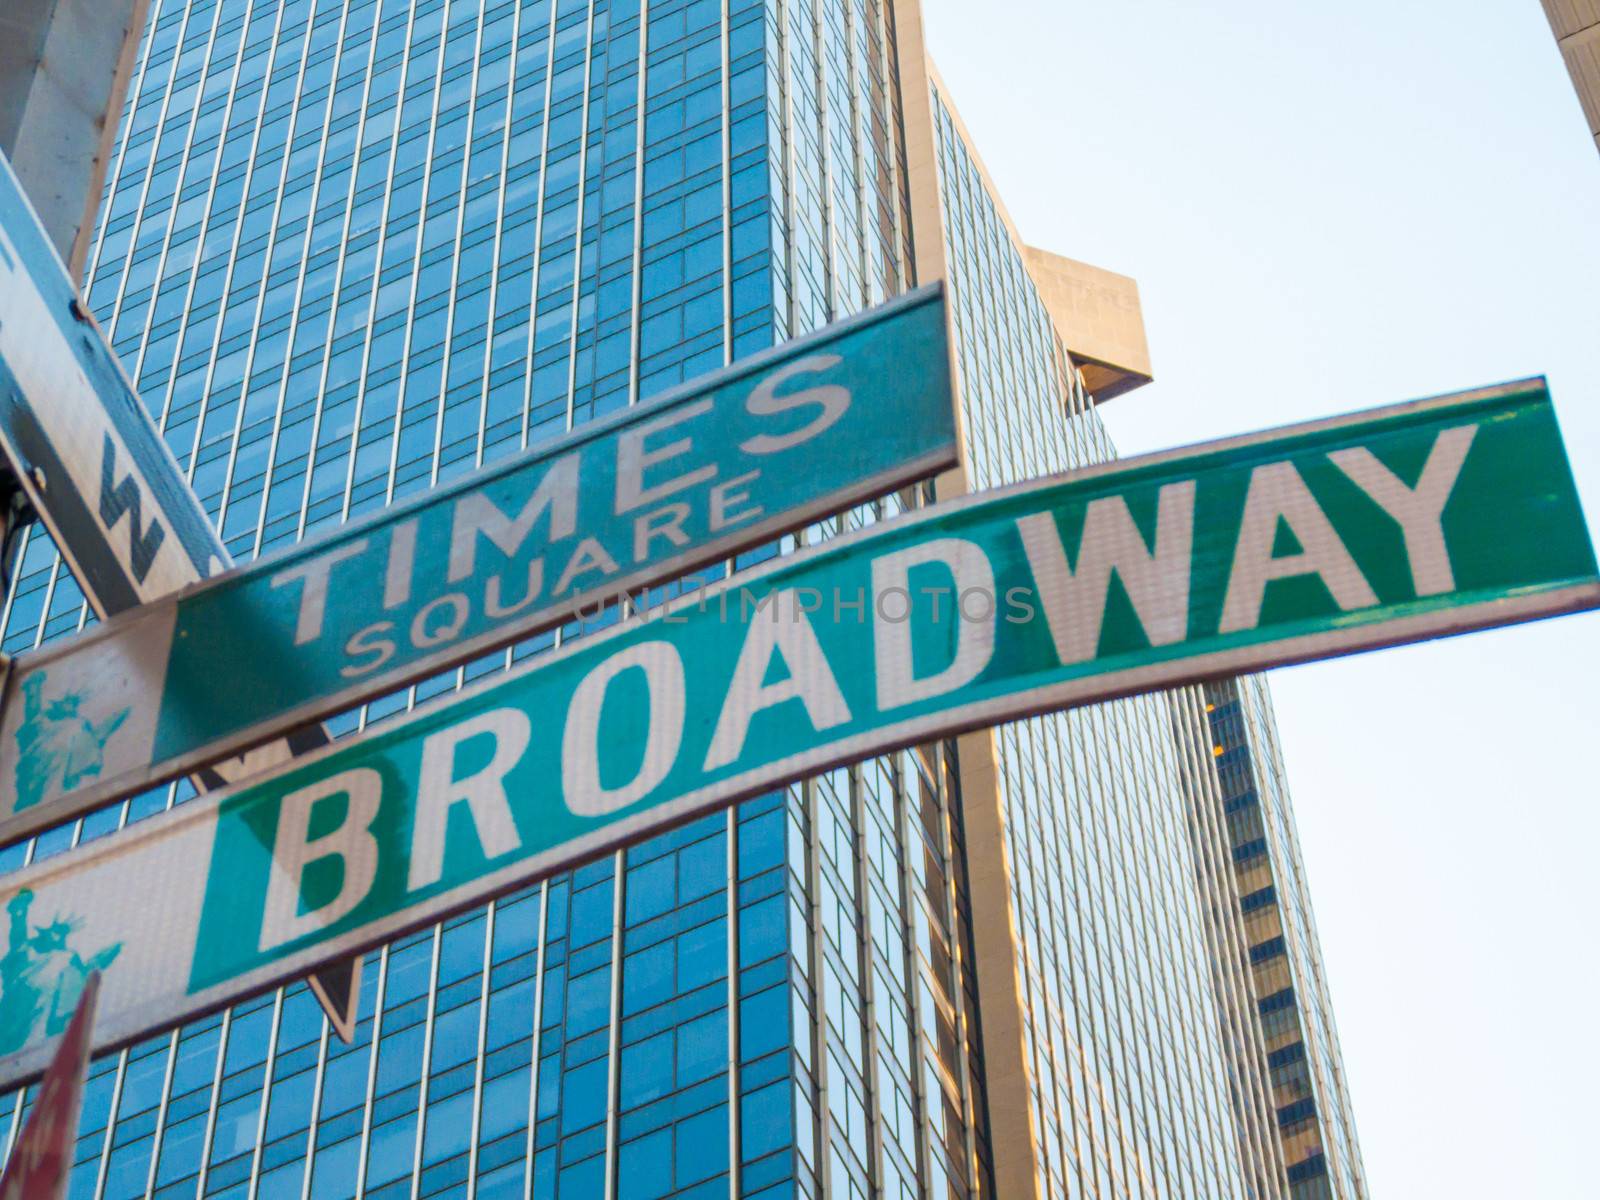 famous street sign for the Broadway in manhattan